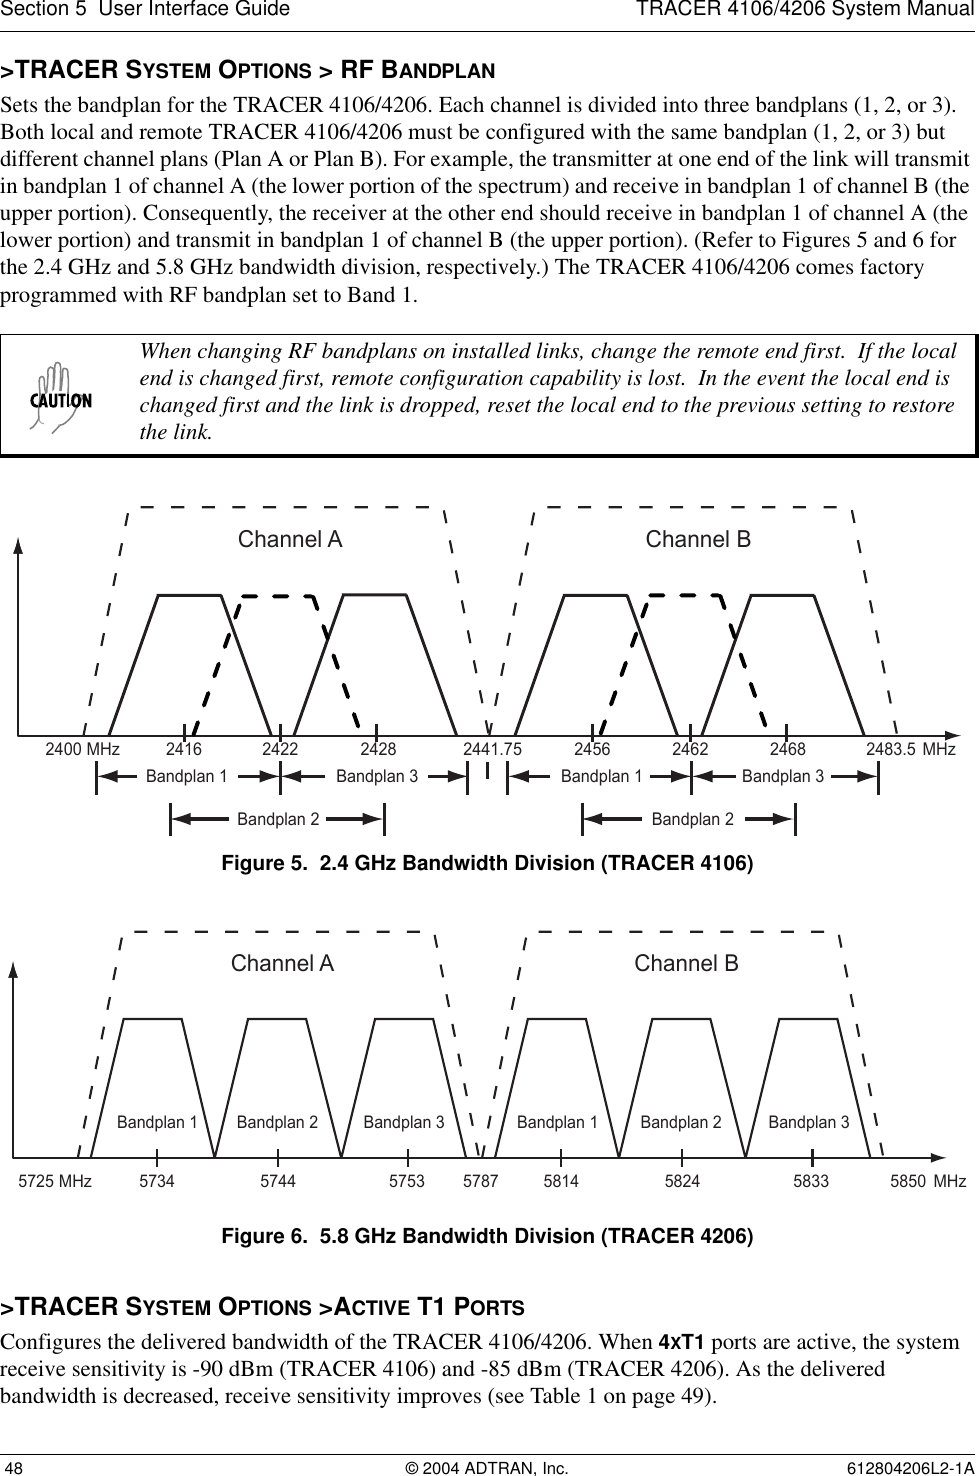 Section 5  User Interface Guide TRACER 4106/4206 System Manual 48 © 2004 ADTRAN, Inc. 612804206L2-1A&gt;TRACER SYSTEM OPTIONS &gt; RF BANDPLANSets the bandplan for the TRACER 4106/4206. Each channel is divided into three bandplans (1, 2, or 3). Both local and remote TRACER 4106/4206 must be configured with the same bandplan (1, 2, or 3) but different channel plans (Plan A or Plan B). For example, the transmitter at one end of the link will transmit in bandplan 1 of channel A (the lower portion of the spectrum) and receive in bandplan 1 of channel B (the upper portion). Consequently, the receiver at the other end should receive in bandplan 1 of channel A (the lower portion) and transmit in bandplan 1 of channel B (the upper portion). (Refer to Figures 5 and 6 for the 2.4 GHz and 5.8 GHz bandwidth division, respectively.) The TRACER 4106/4206 comes factory programmed with RF bandplan set to Band 1.Figure 5.  2.4 GHz Bandwidth Division (TRACER 4106)Figure 6.  5.8 GHz Bandwidth Division (TRACER 4206)&gt;TRACER SYSTEM OPTIONS &gt;ACTIVE T1 PORTSConfigures the delivered bandwidth of the TRACER 4106/4206. When 4XT1 ports are active, the system receive sensitivity is -90 dBm (TRACER 4106) and -85 dBm (TRACER 4206). As the delivered bandwidth is decreased, receive sensitivity improves (see Table 1 on page 49).When changing RF bandplans on installed links, change the remote end first.  If the local end is changed first, remote configuration capability is lost.  In the event the local end is changed first and the link is dropped, reset the local end to the previous setting to restore the link.Channel!A2416 2441.752422 24282400 MHz 2483.5!MHzBandplan!3Bandplan!2Bandplan!1Channel!B2456 2462 2468Bandplan!3Bandplan!2Bandplan!1Channel!A57345725 5787 58505744 5753MHz MHzBandplan!3Bandplan!2Bandplan!1Channel!B5814 5824 5833Bandplan!3Bandplan!2Bandplan!1